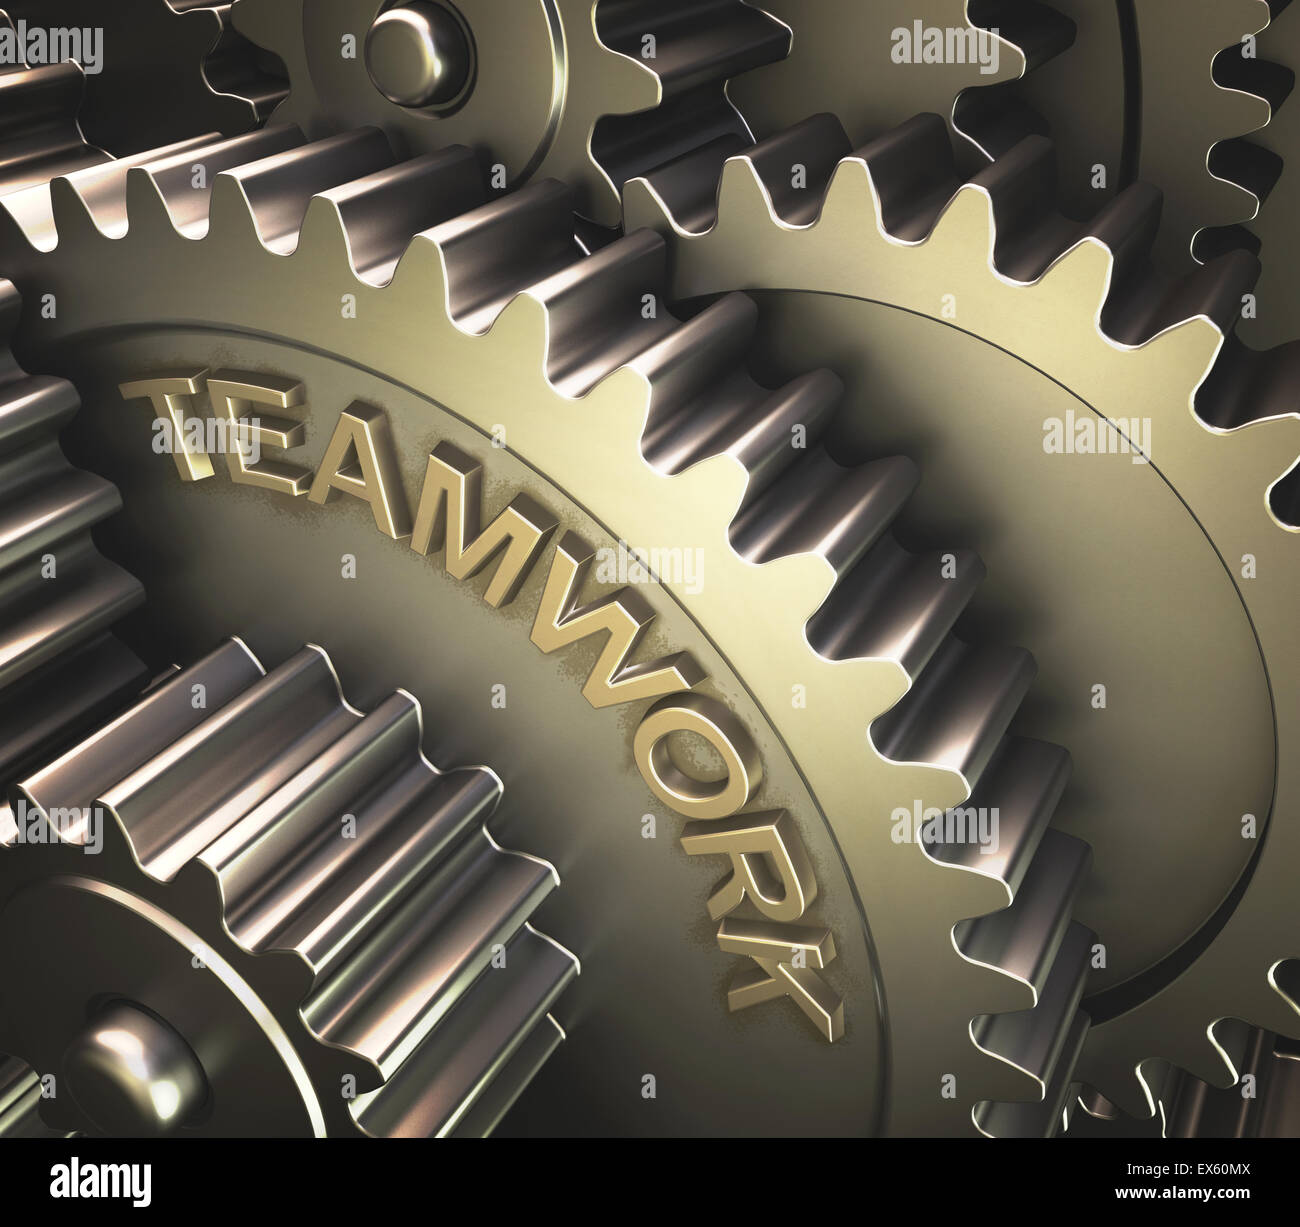 Set of gears with the word teamwork printed on the side. Stock Photo